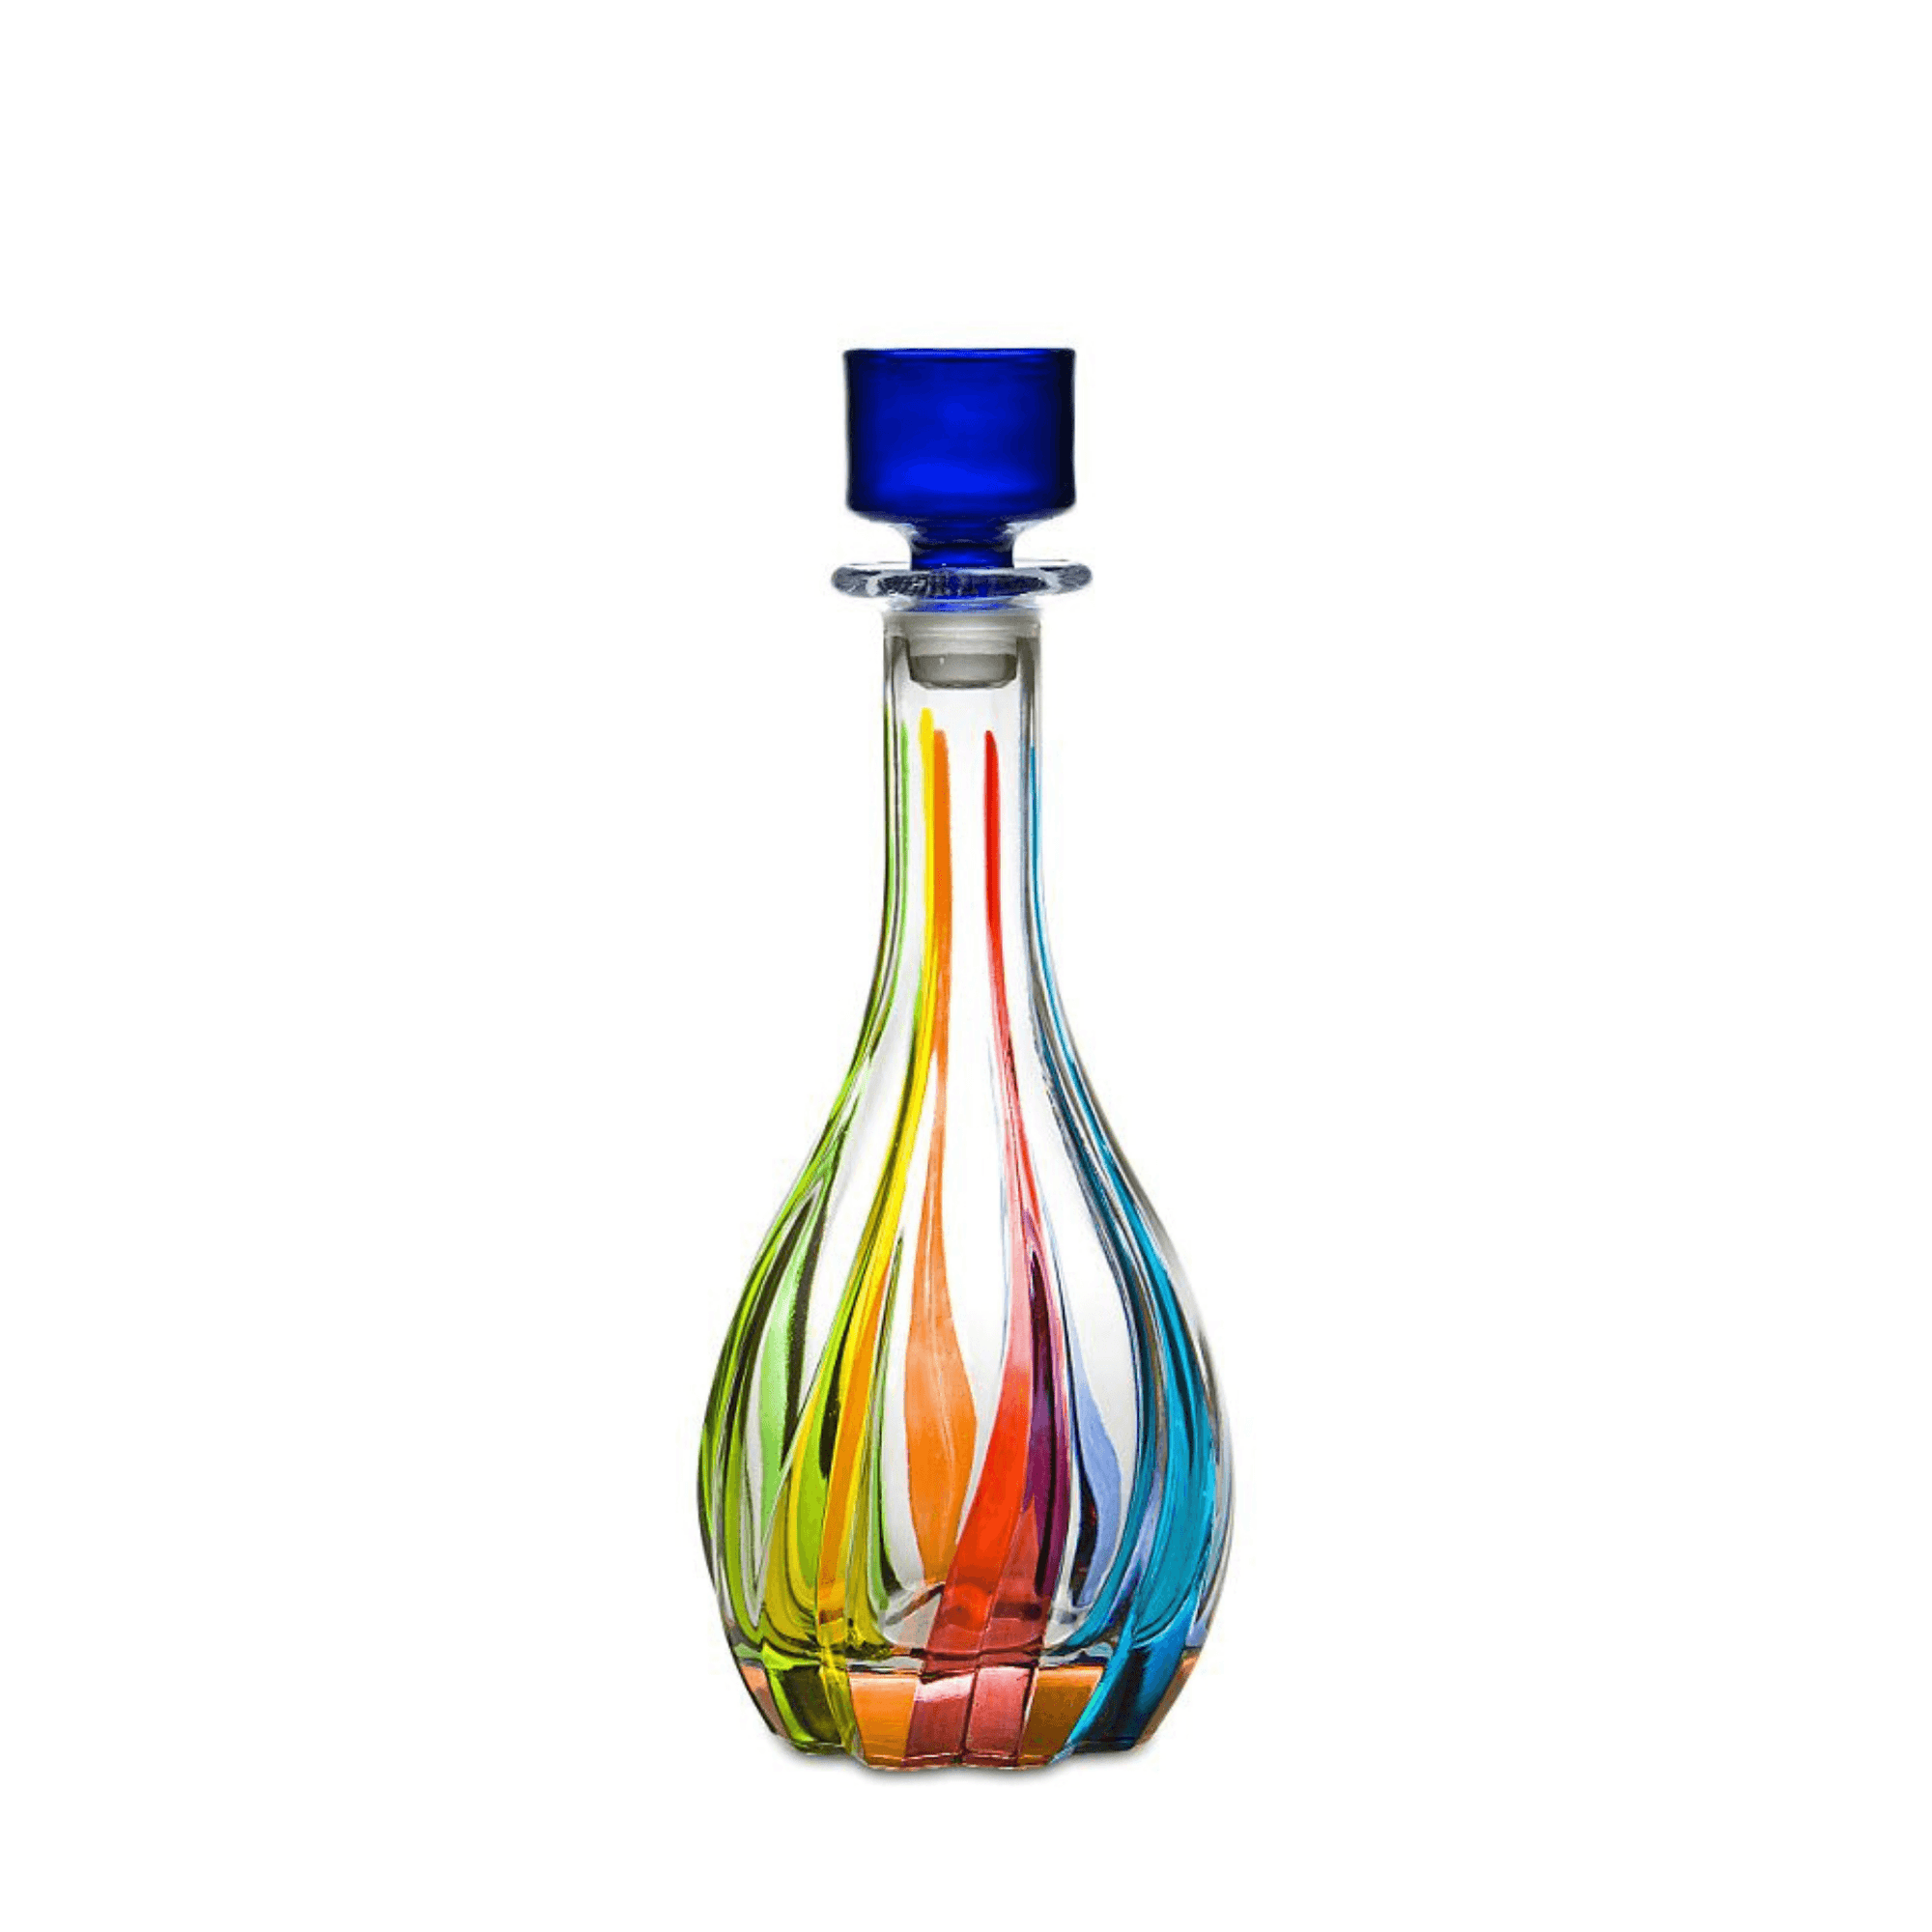 Trix Round Decanter, Hand Painted Crystal, Made in Italy at MyItalianDecor